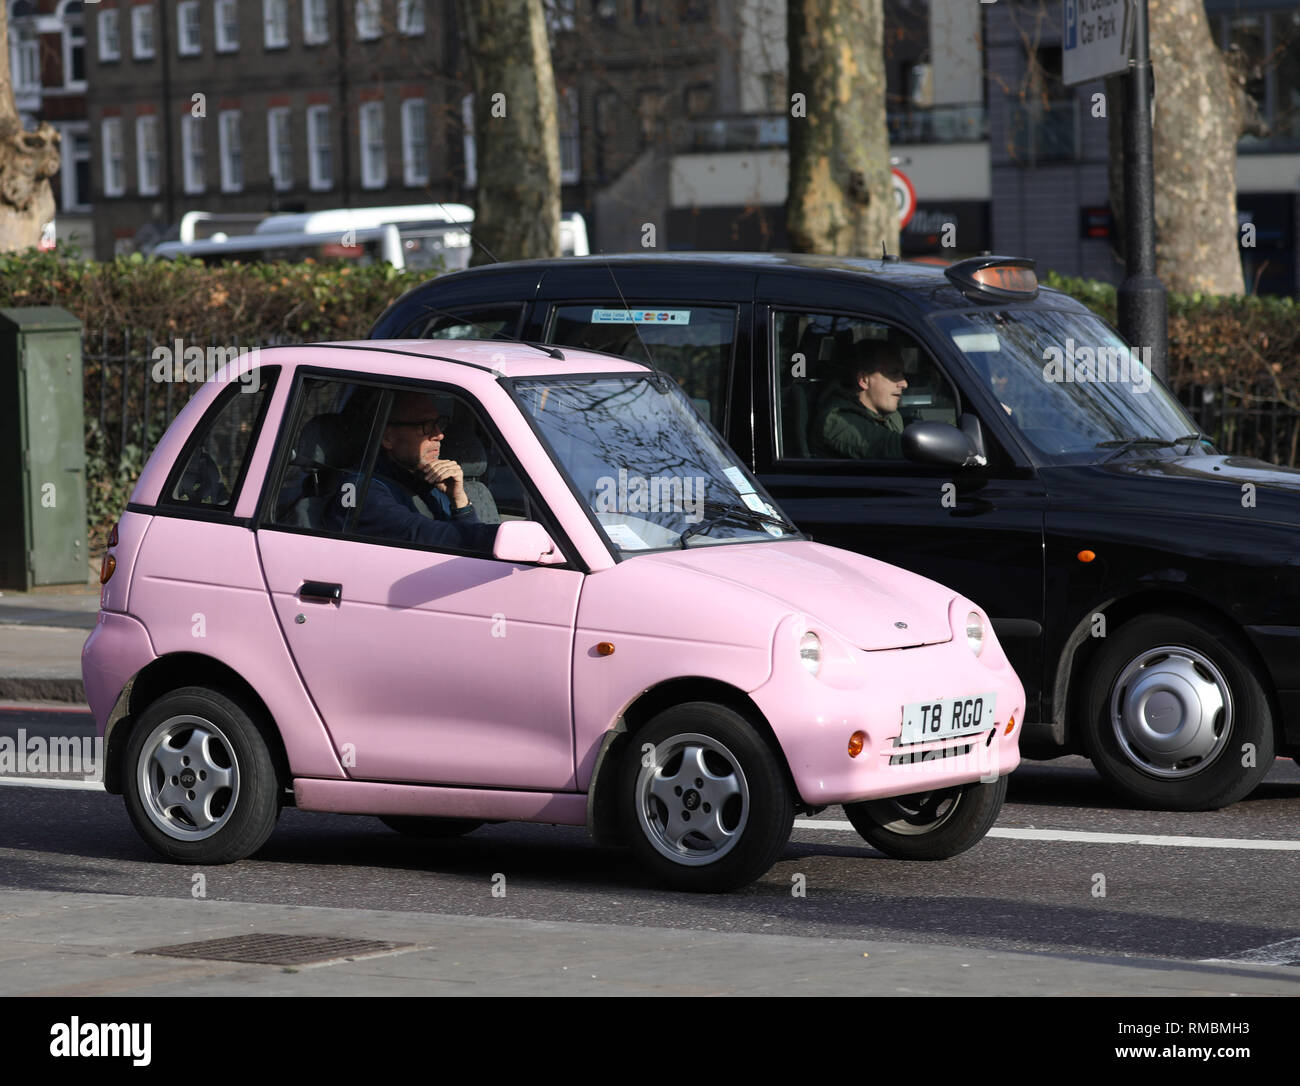 REVAi, known as G-Wiz in the United Kingdom, is a small micro electric car, made by the Indian manufacturer Reva Electric Car Company between 2001 and Stock Photo